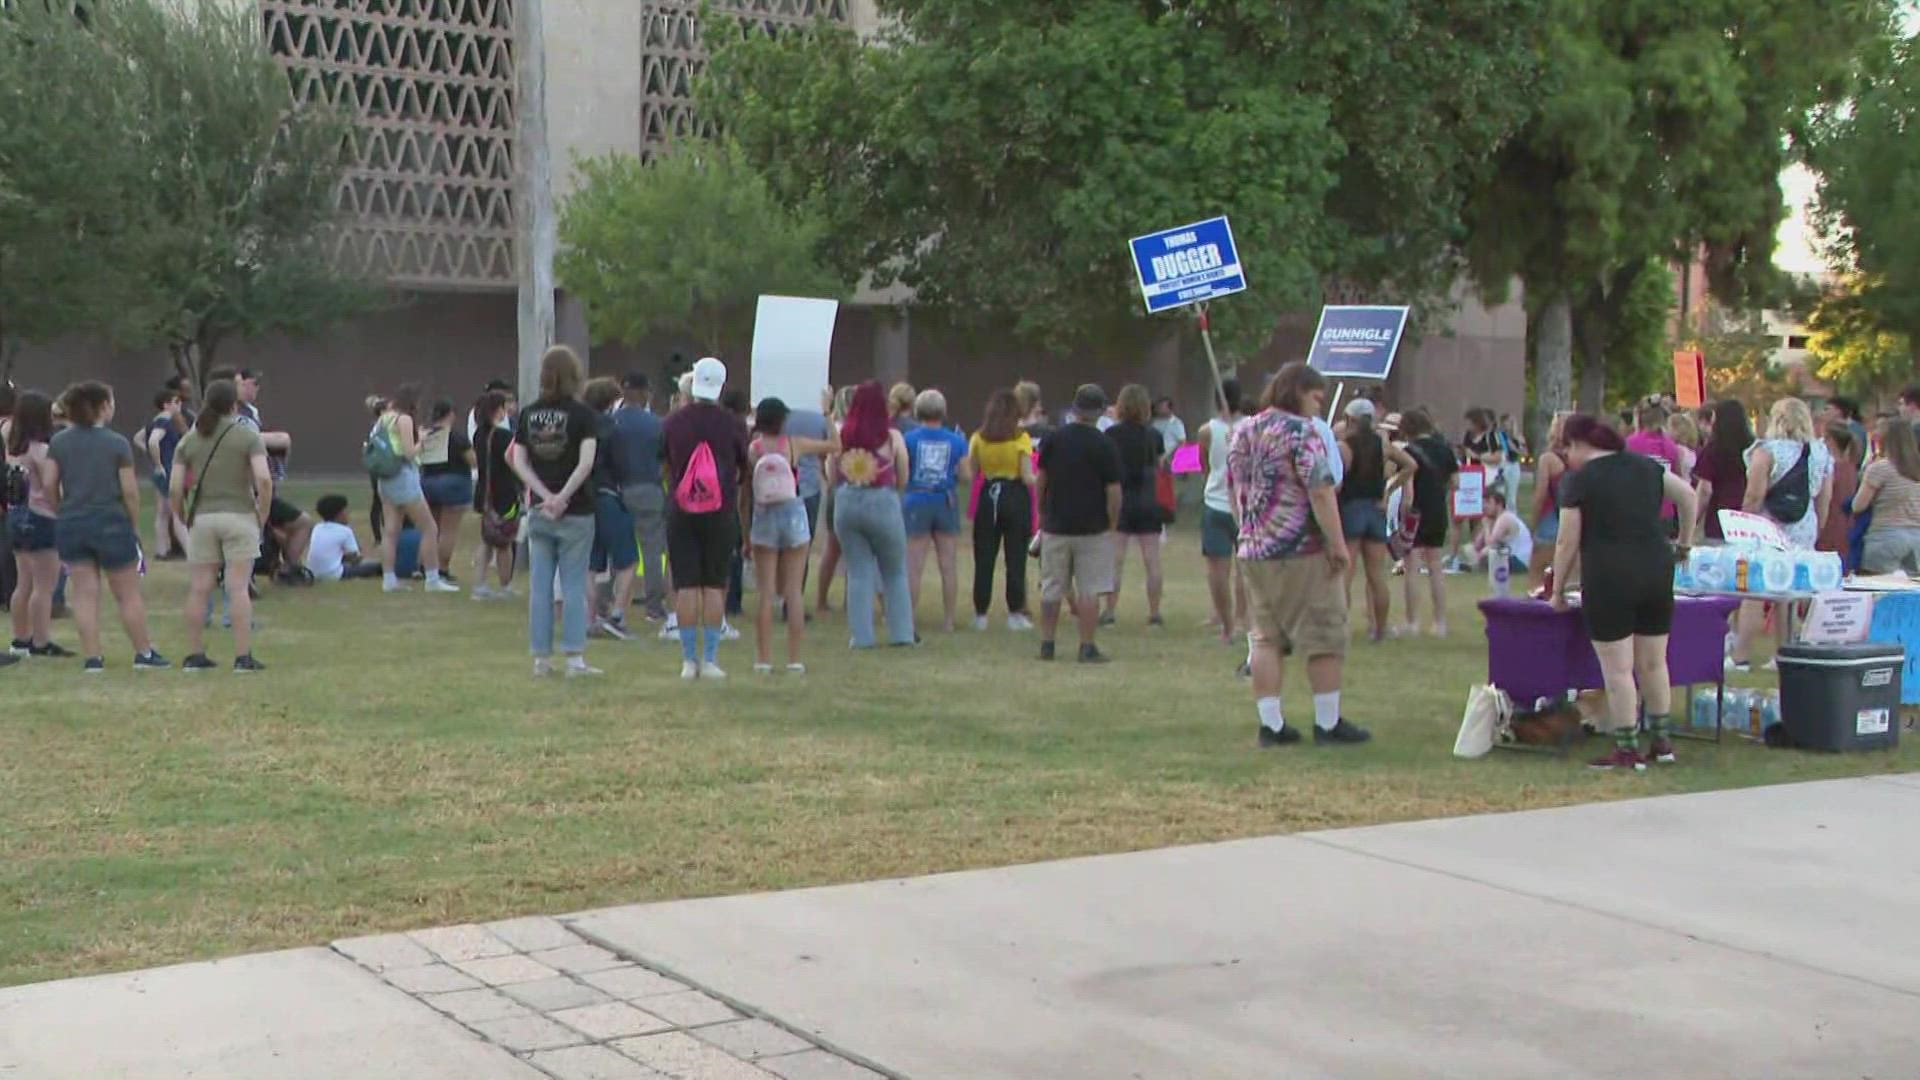 For a second day, people rally at the Arizona State Capitol following a judge's near-total abortion law on Friday.